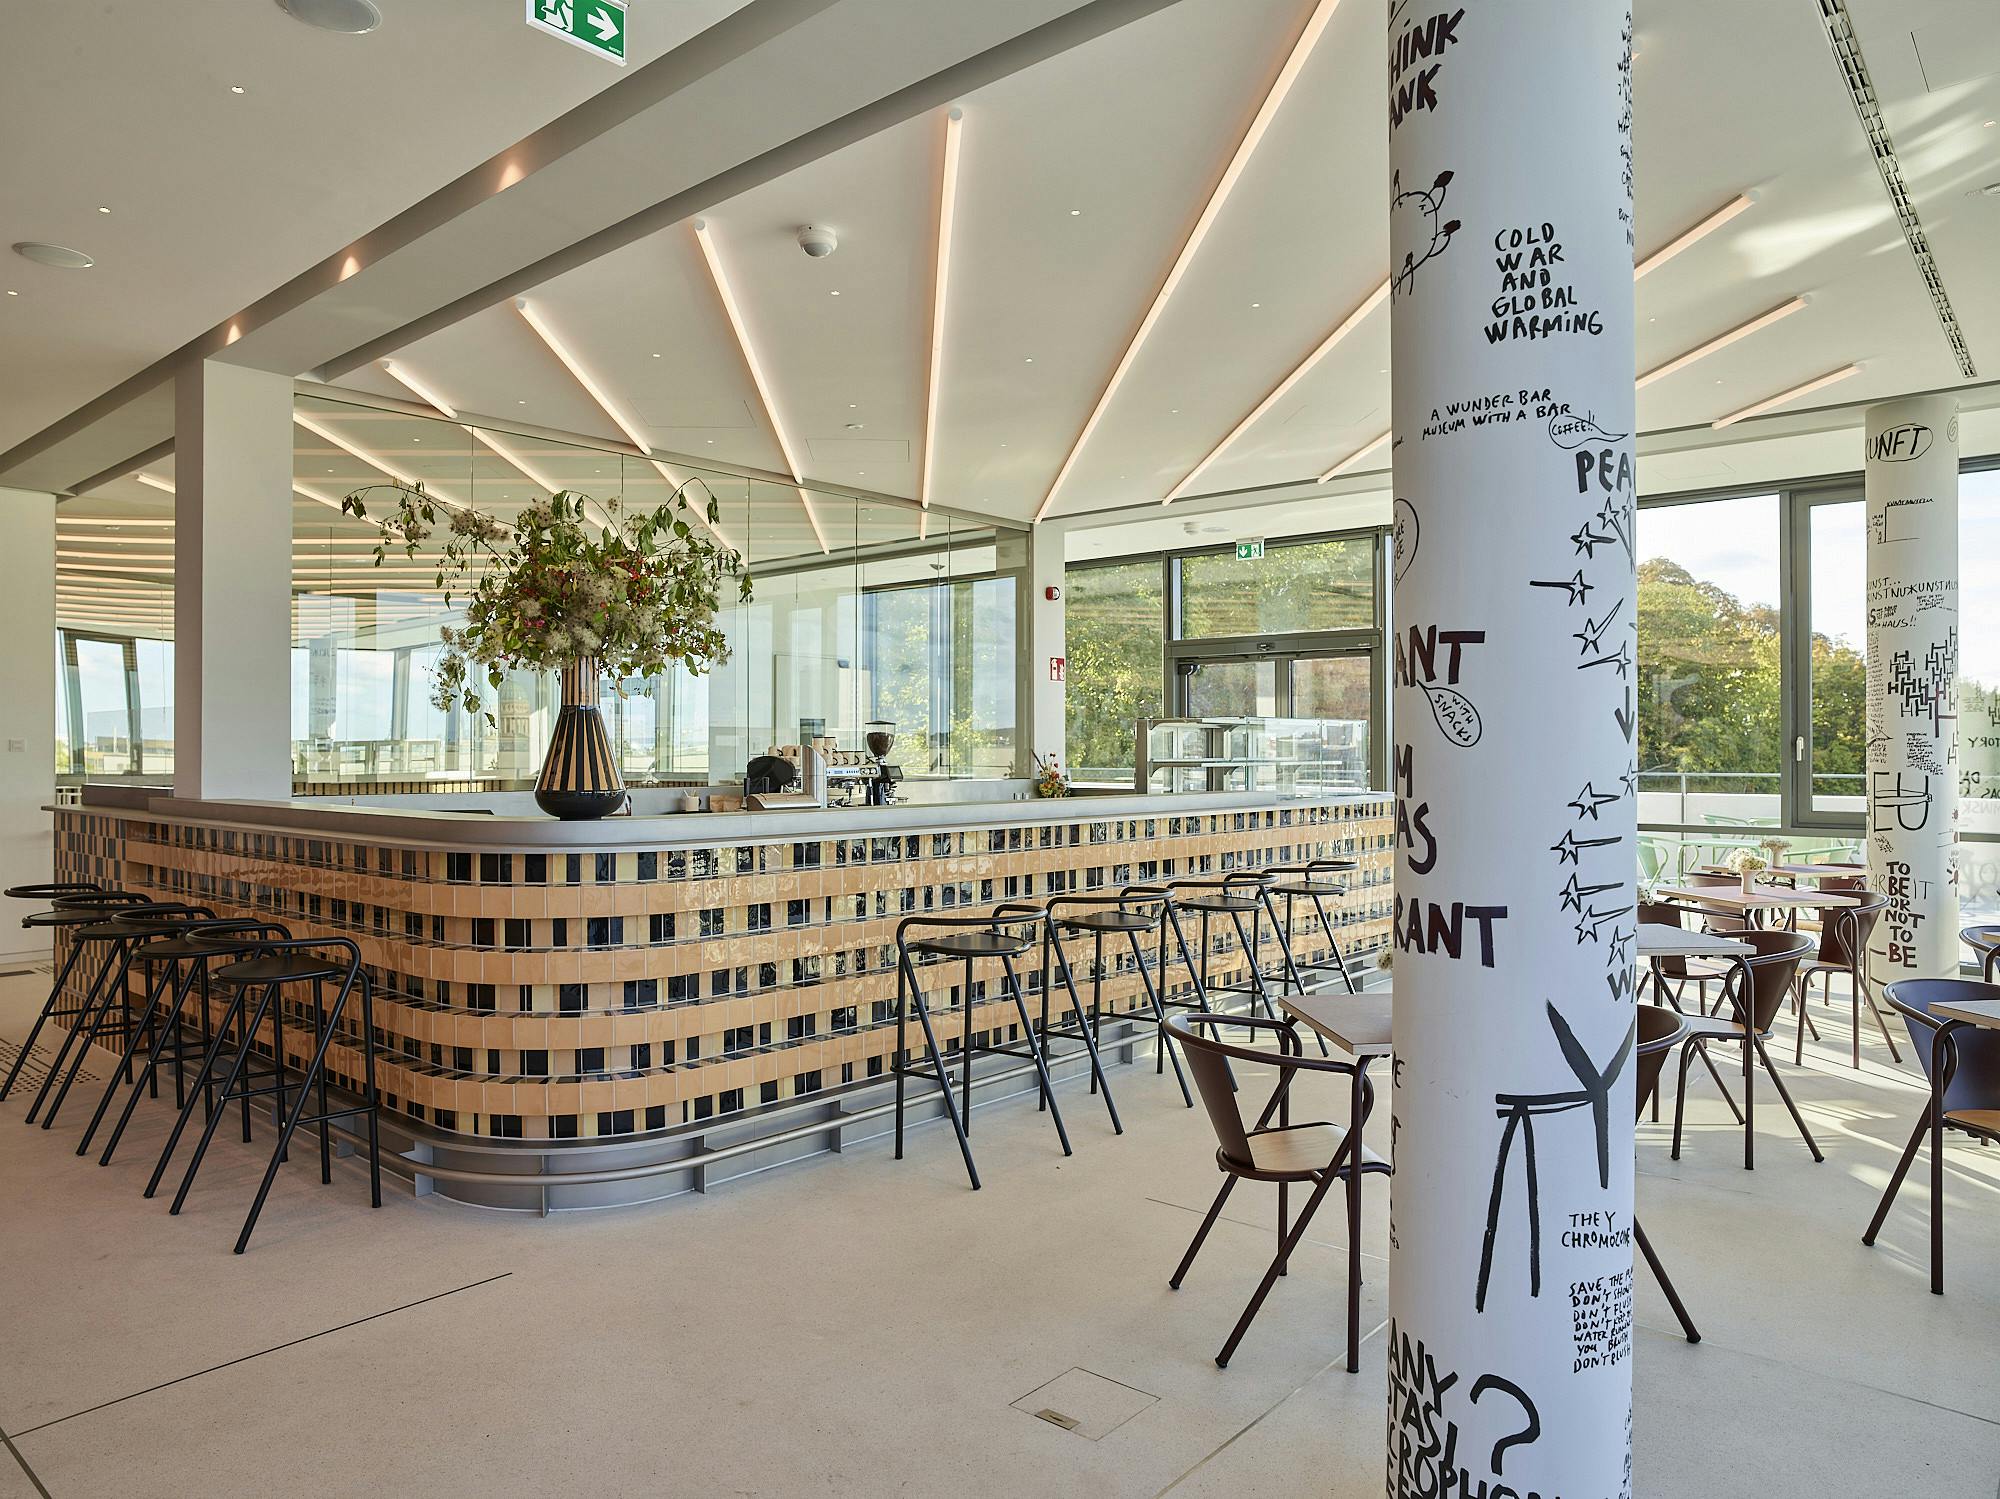 Photo: View into Café Hedwig at DAS MINSK. Behind a column painted with black words and signs by the artist Dan Perjovschi there is a bar counter decorated with brown and black tiles.